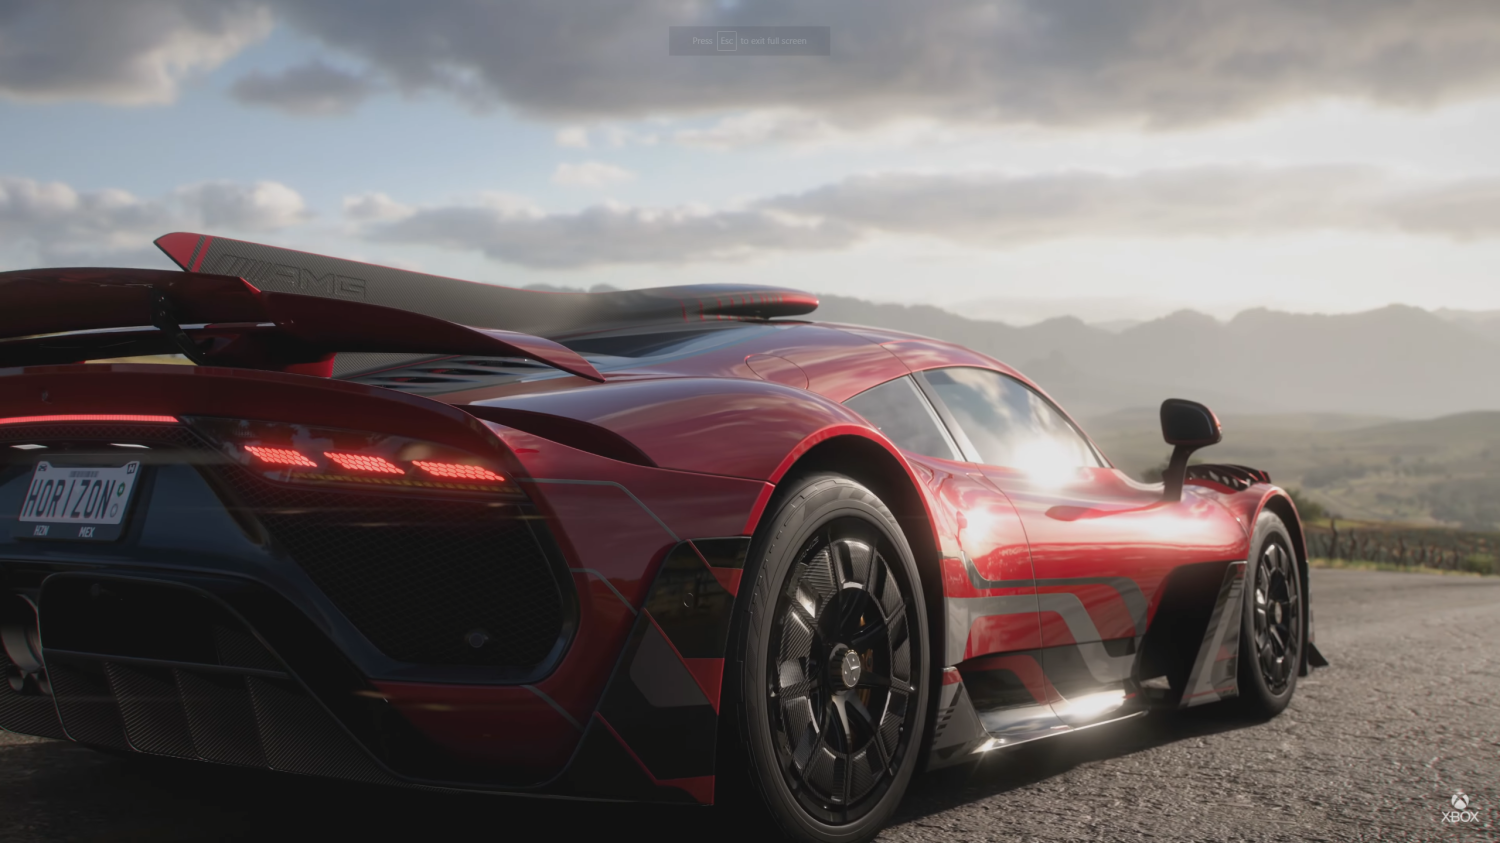 Forza Horizon 5 system requirements: Here are the PC specs you need